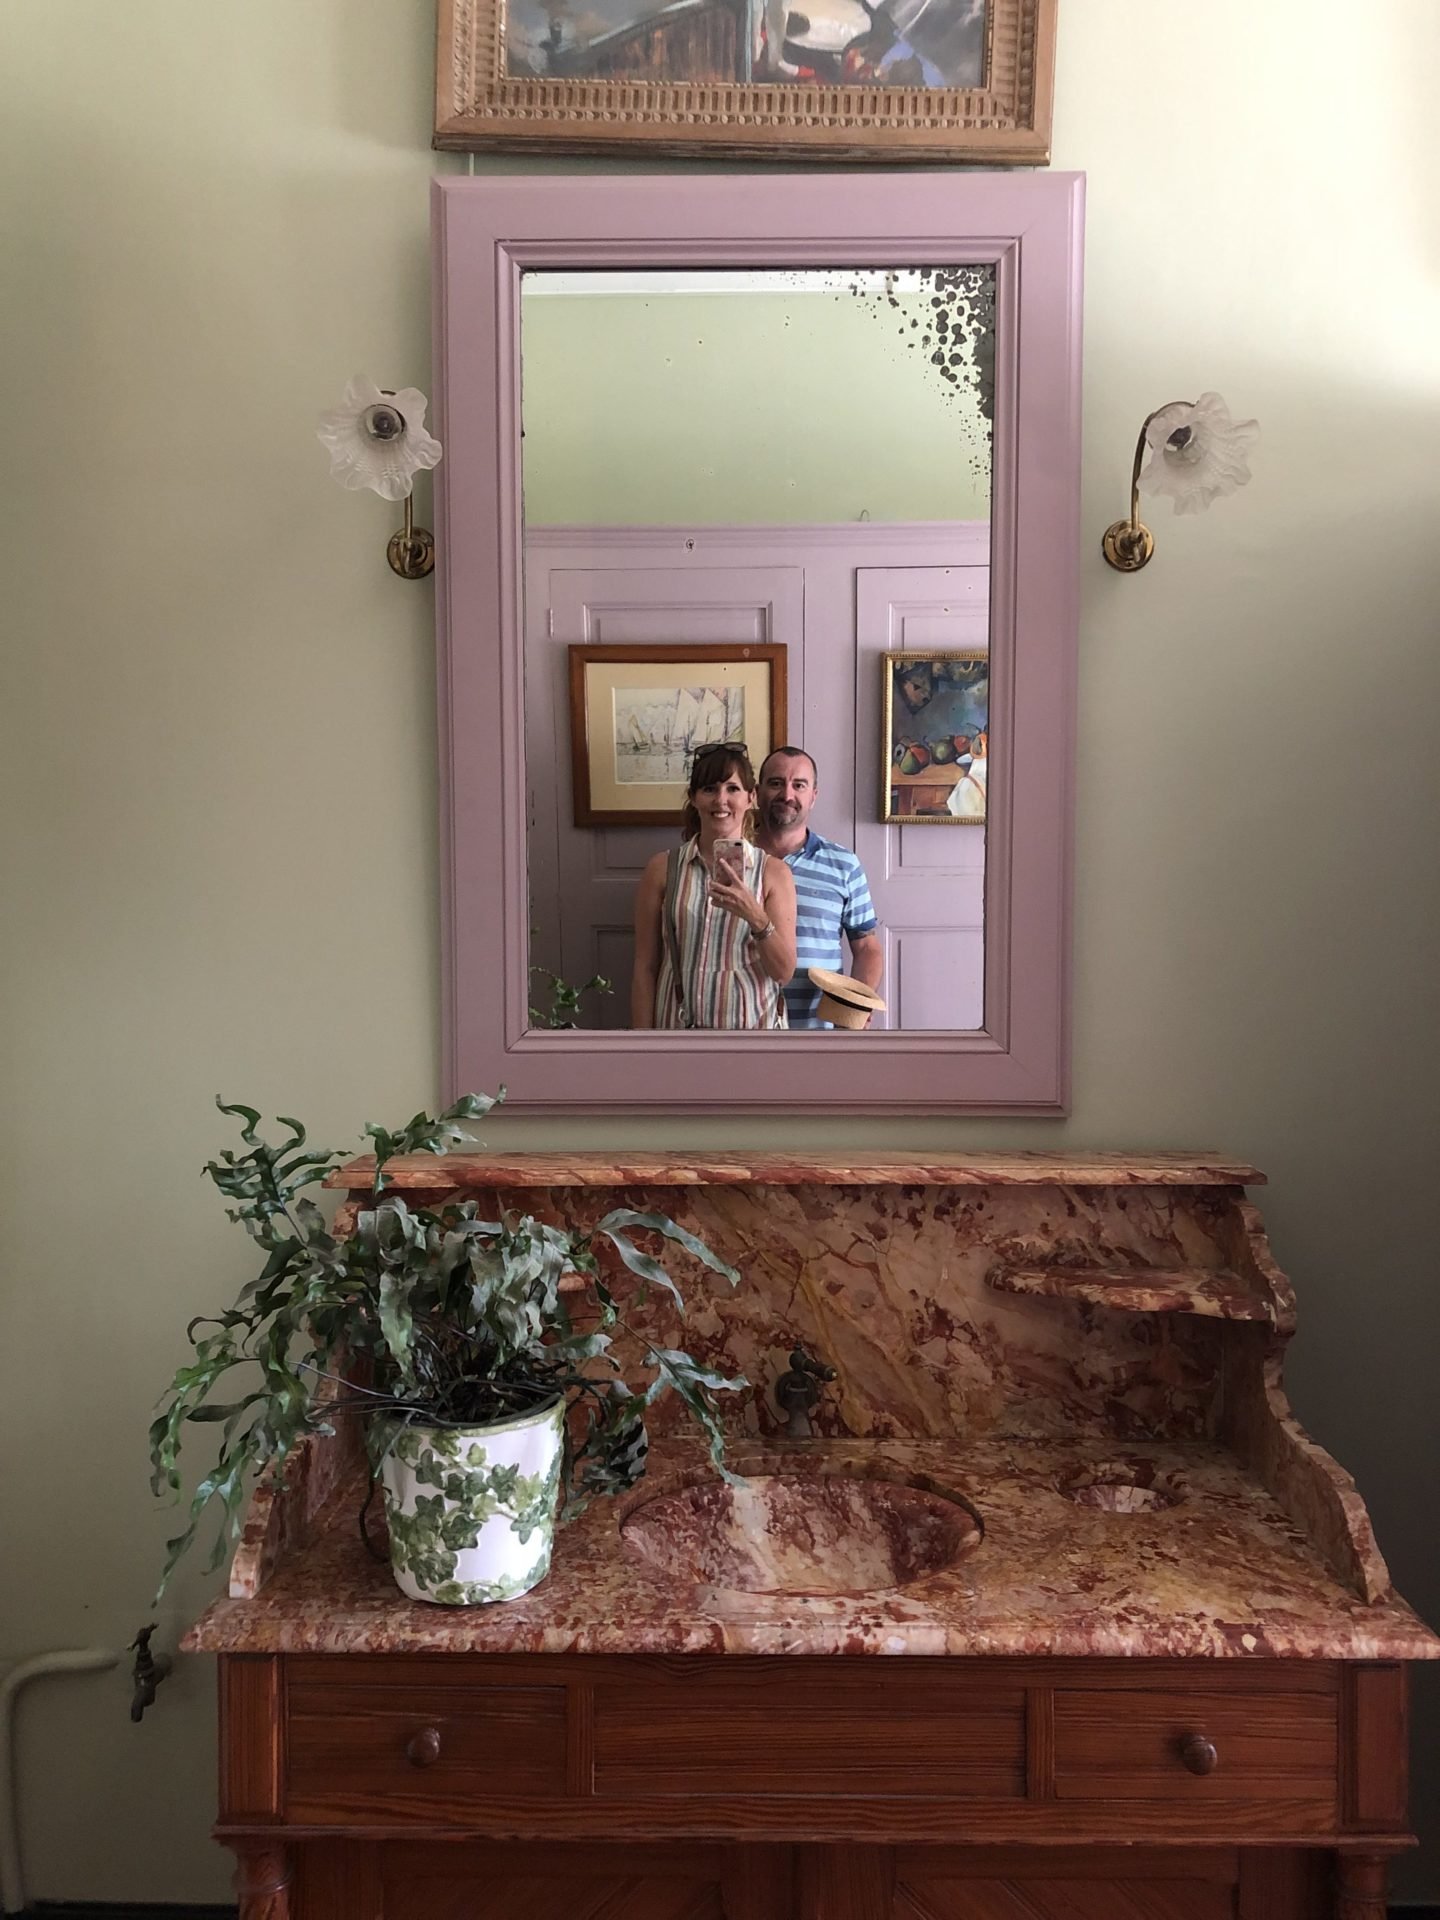 The bathroom dressing rooms of Monets home are towards the centre of the house with ornate washstands. Plenty of mirrors adorn the room with again more windows letting in light. Monet's dressing room was a cool mint